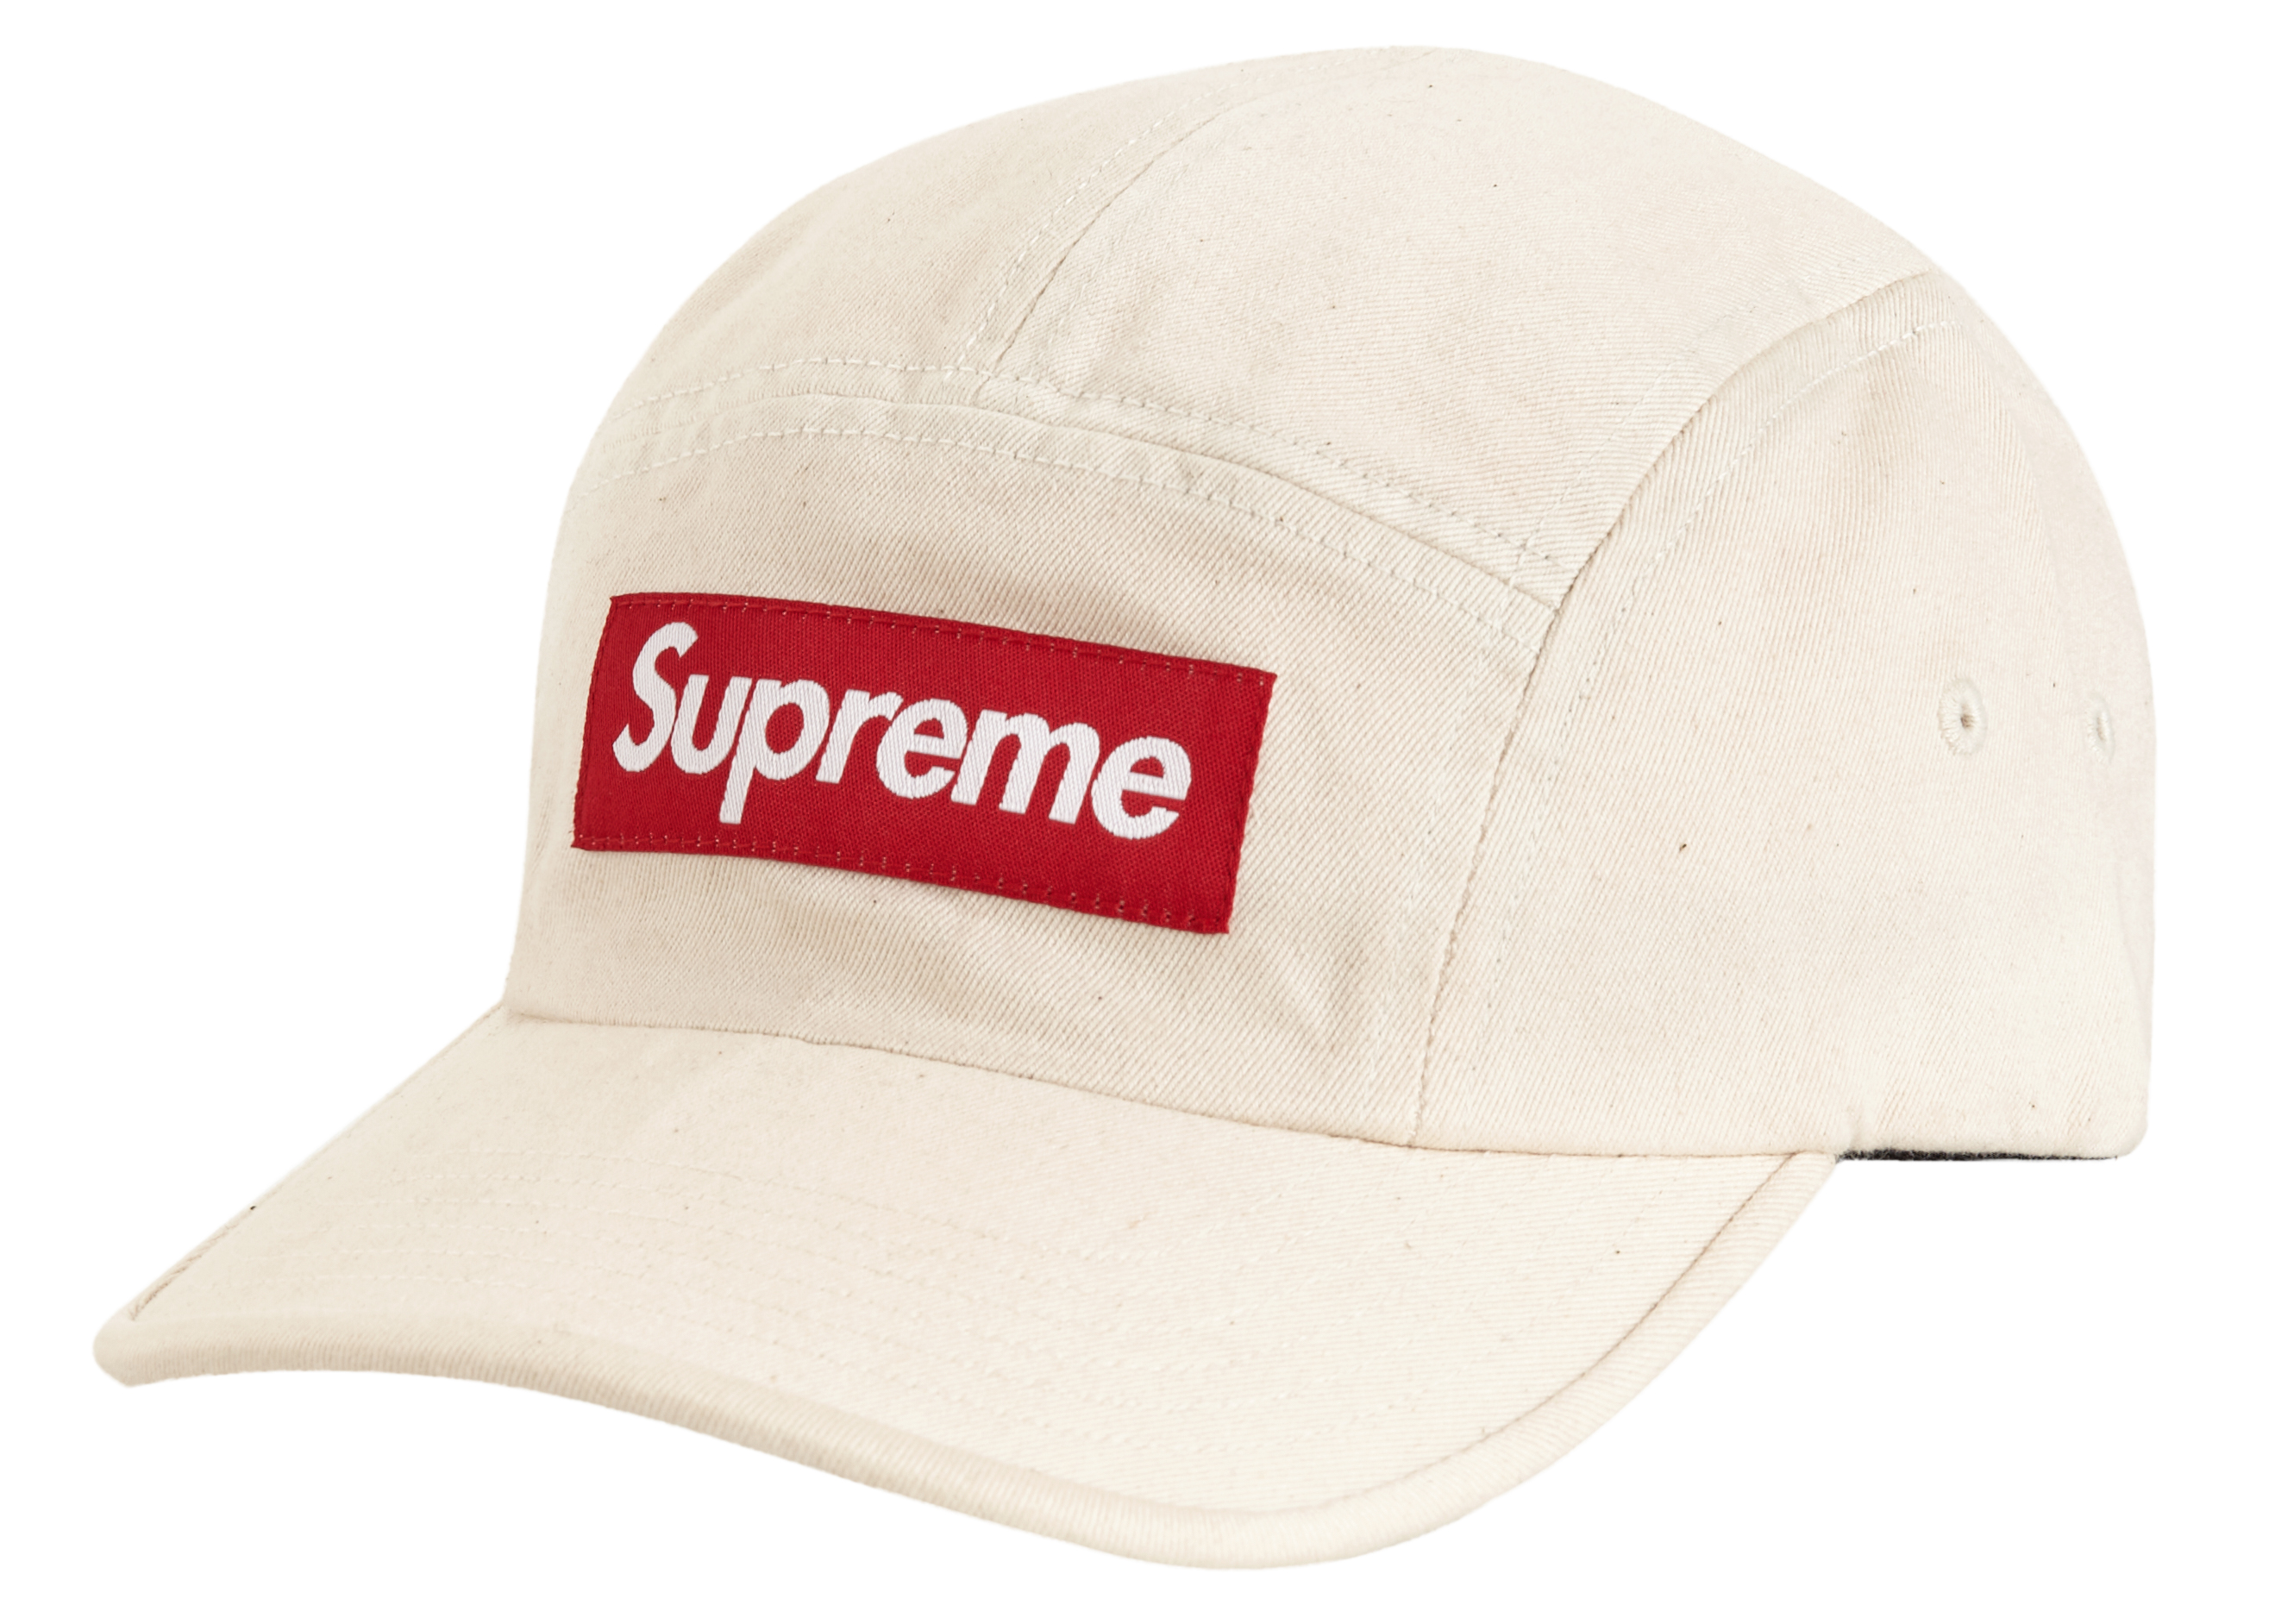 Supreme Washed Chino Twill Camp Cap White - FW17 - US